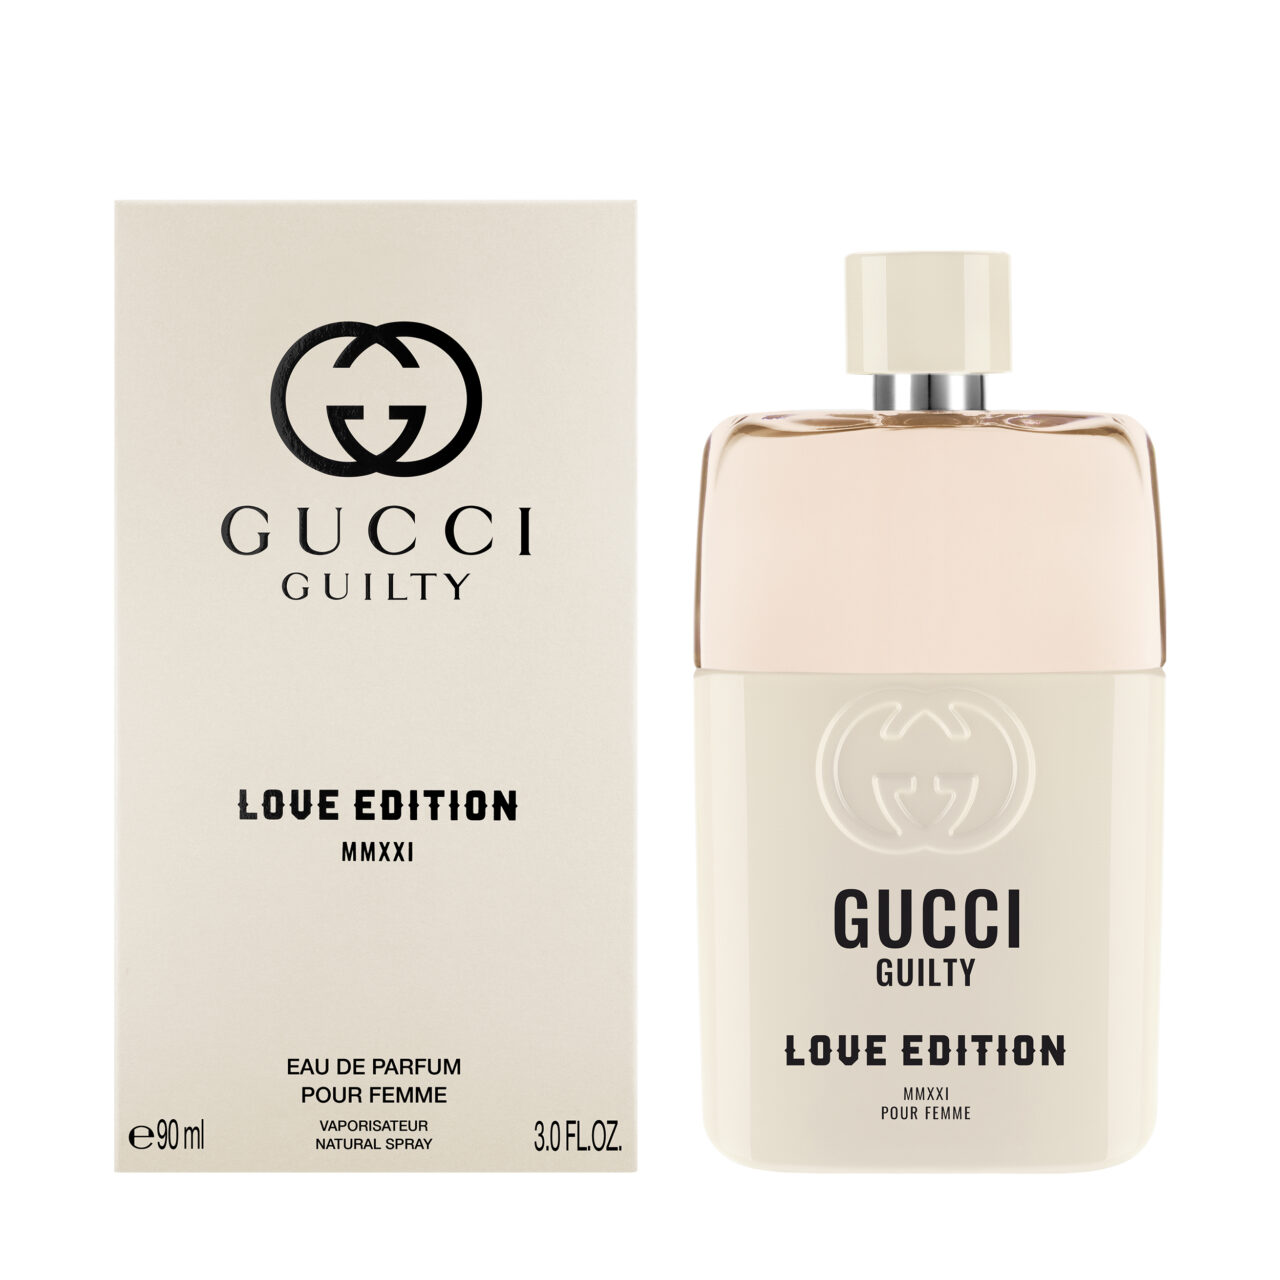 Gucci Guilty Love Edition 2021